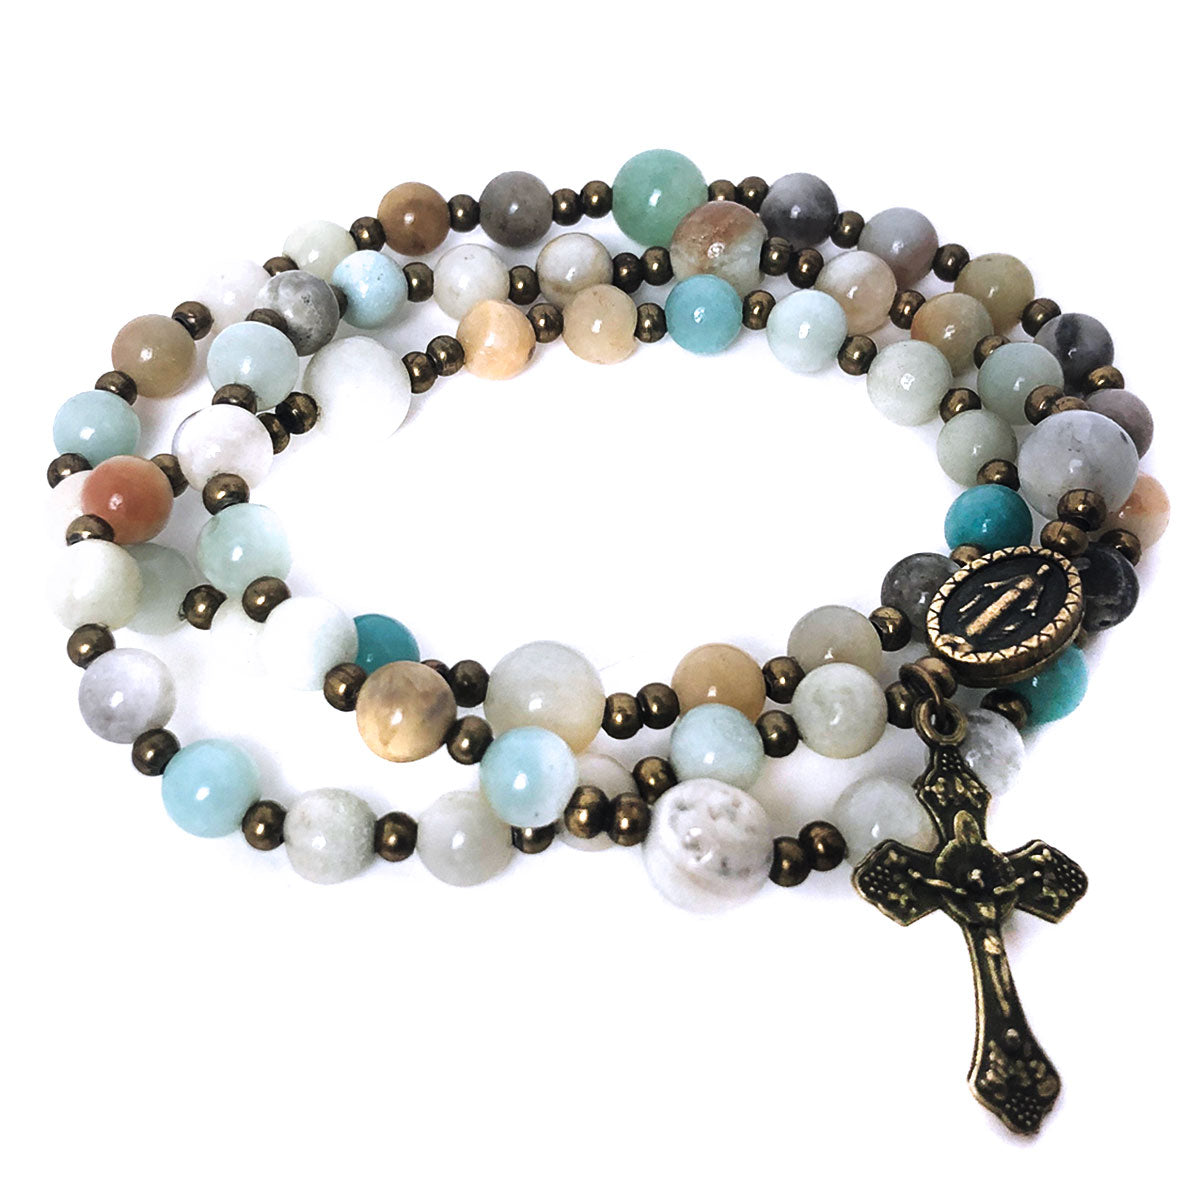 Jesus Christ Amazonite Stone Rosary and Rosary Bracelet Set by Catholic Heirlooms - Confirmation - Holy Communion Gift - Rosary Necklace